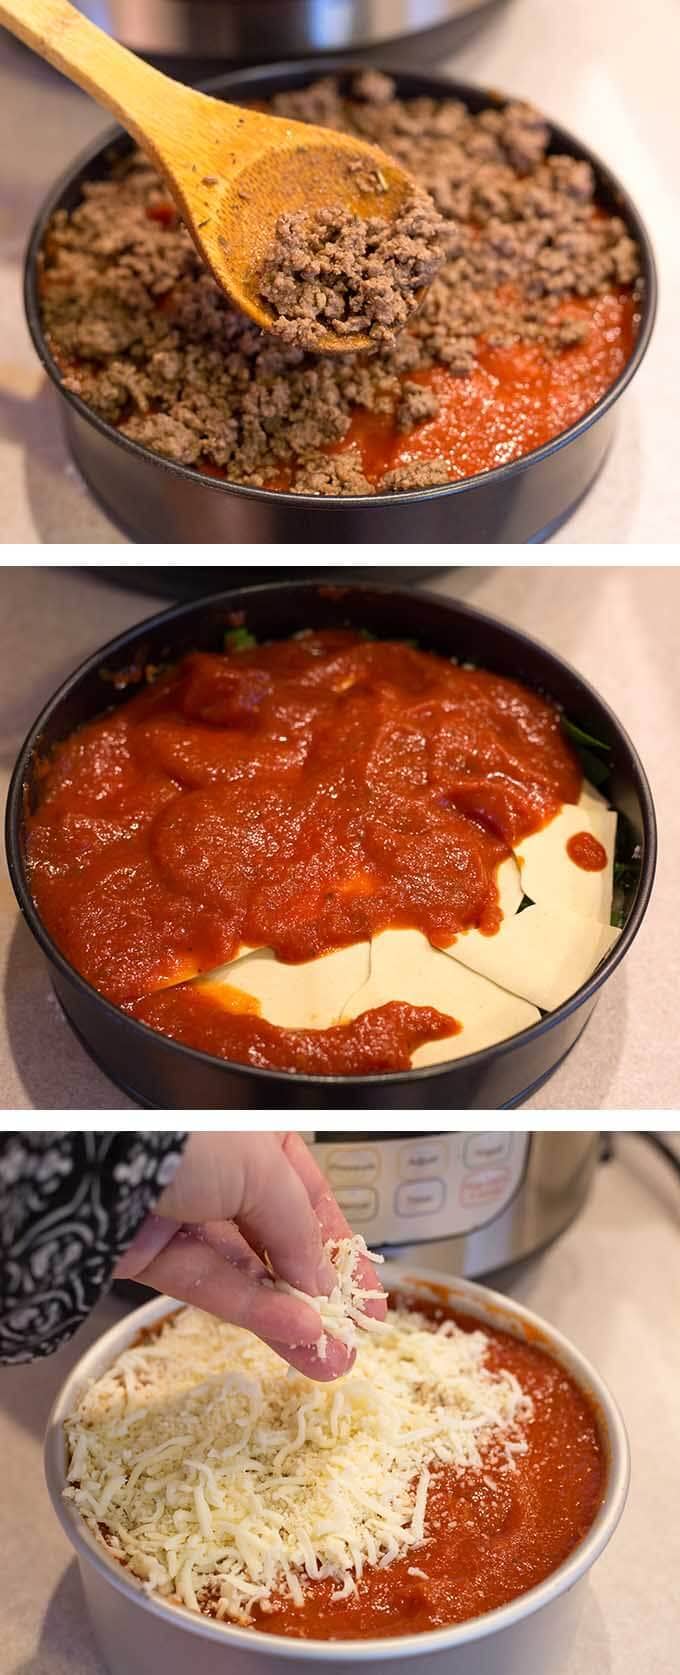 Three images showing layering of meat, sauce, and cheese